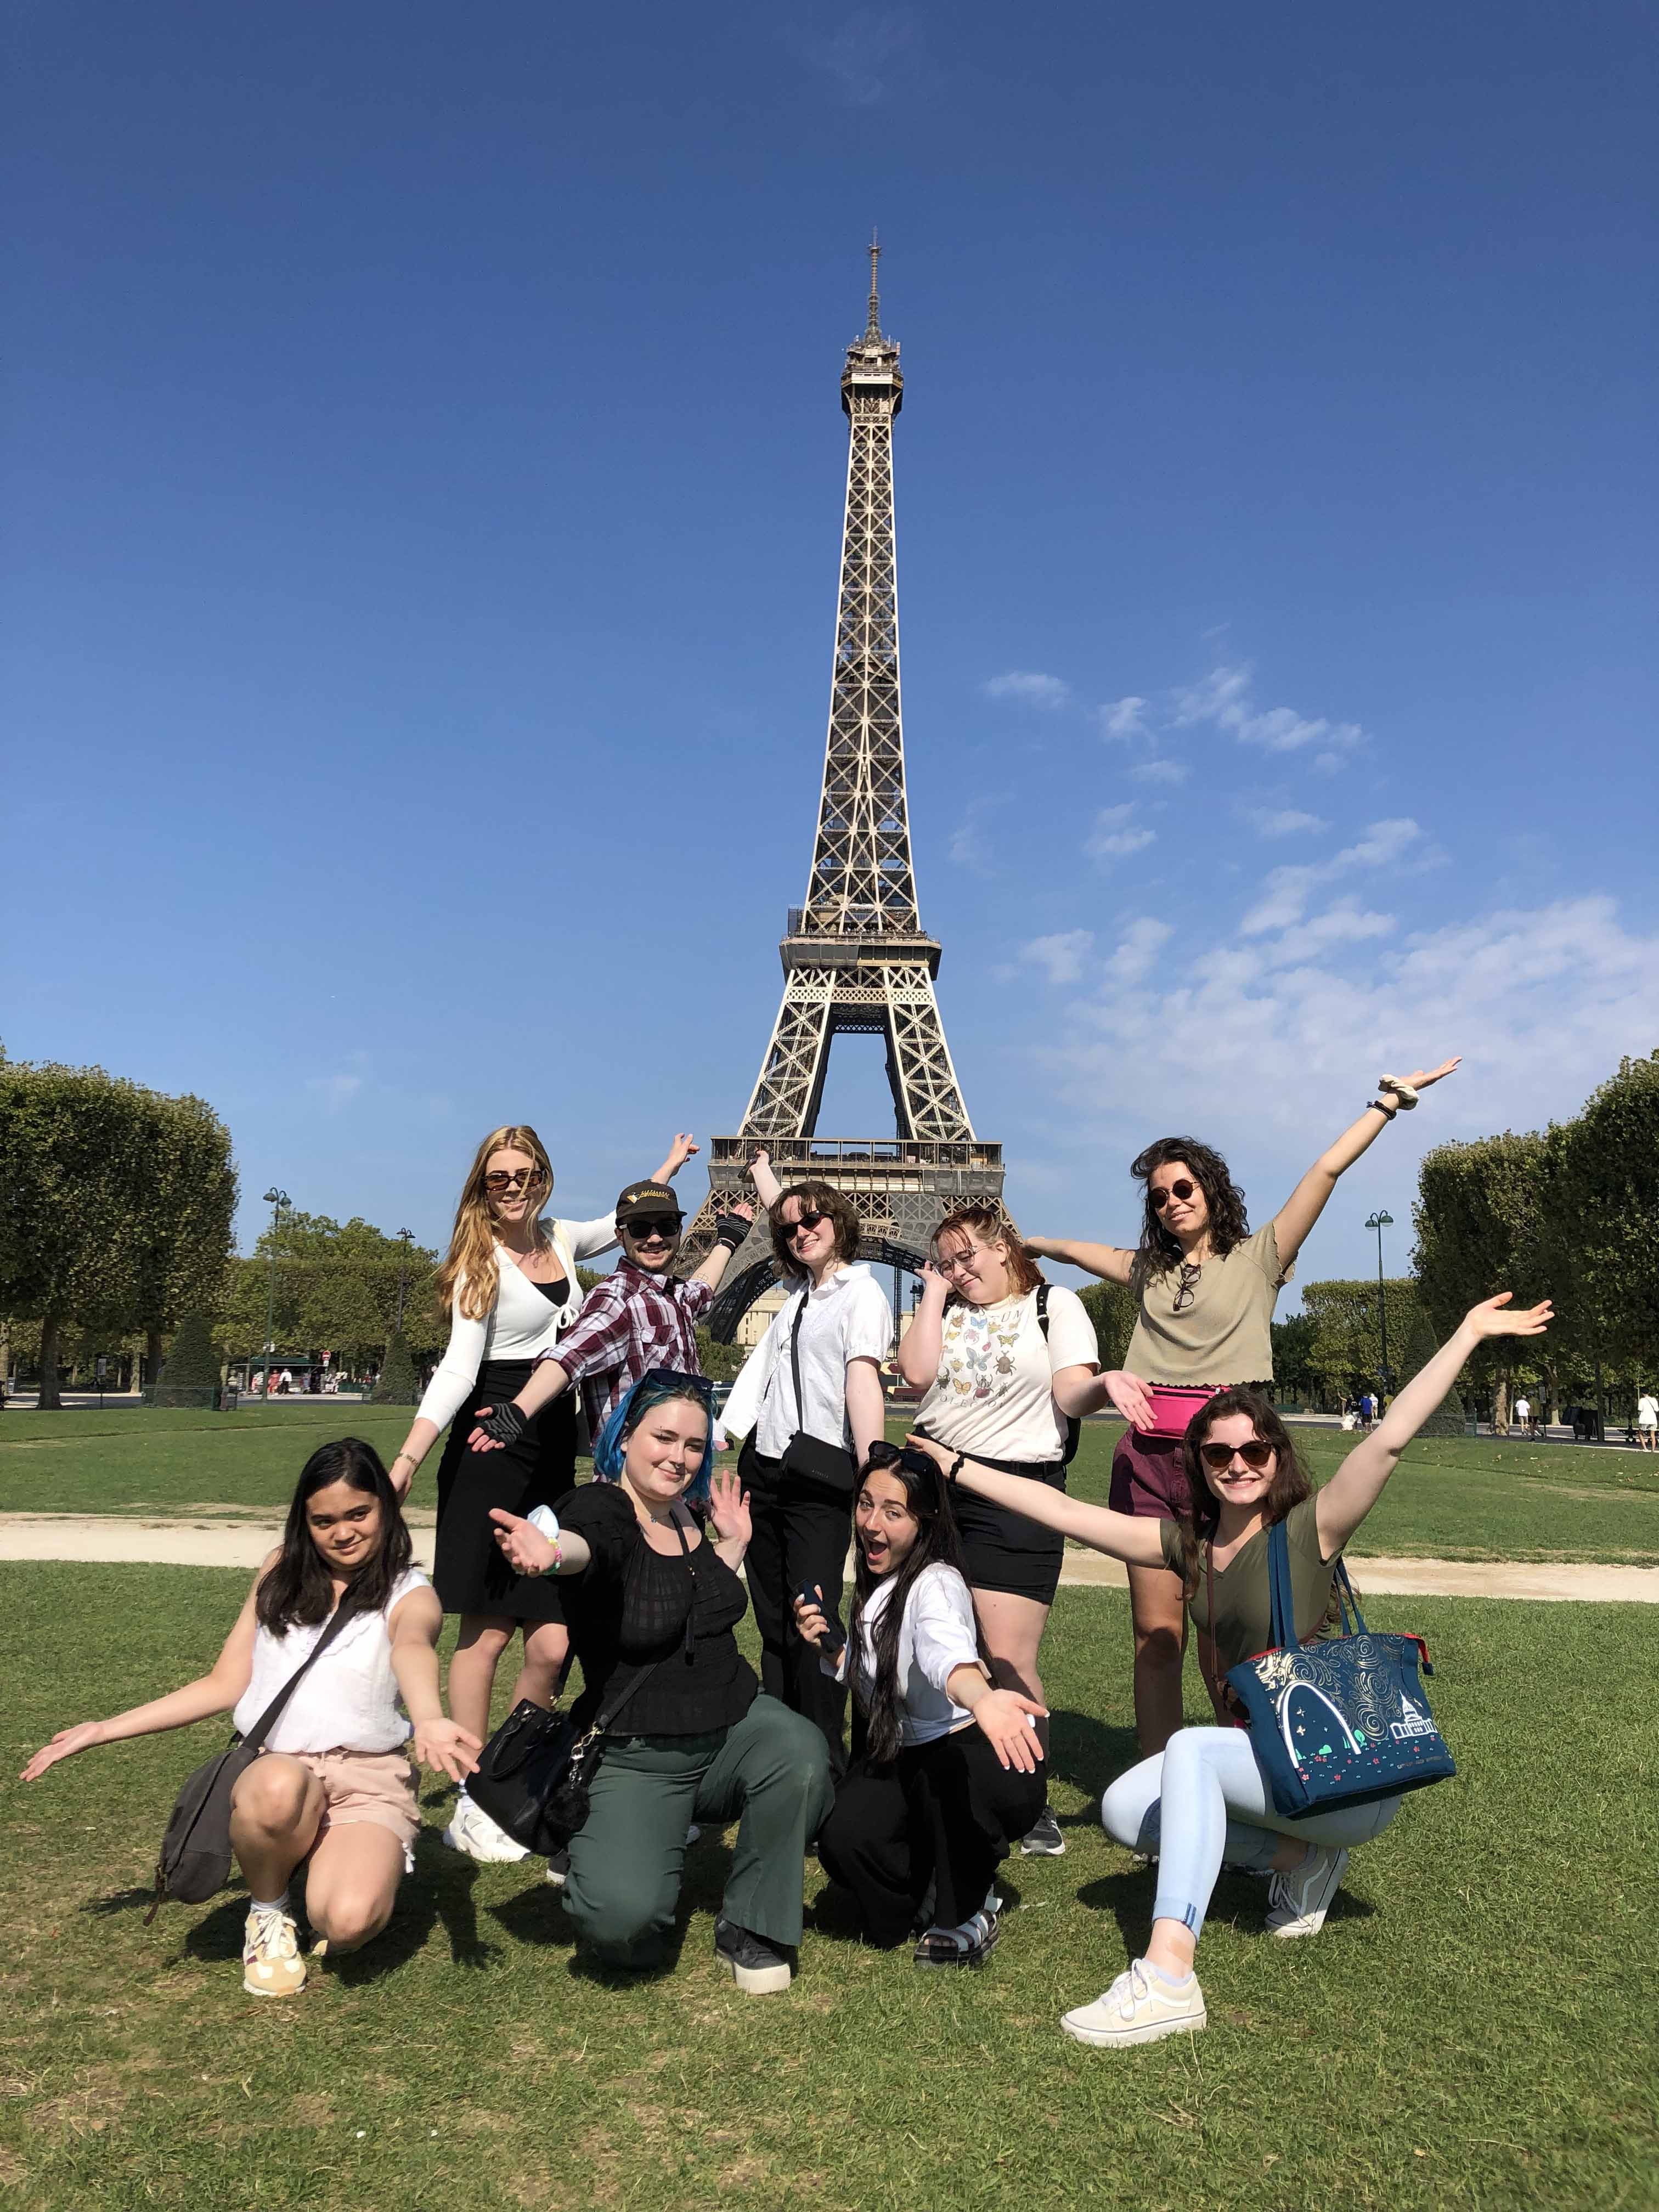 Students posing in front of the Eiffel Tower in Paris, France.